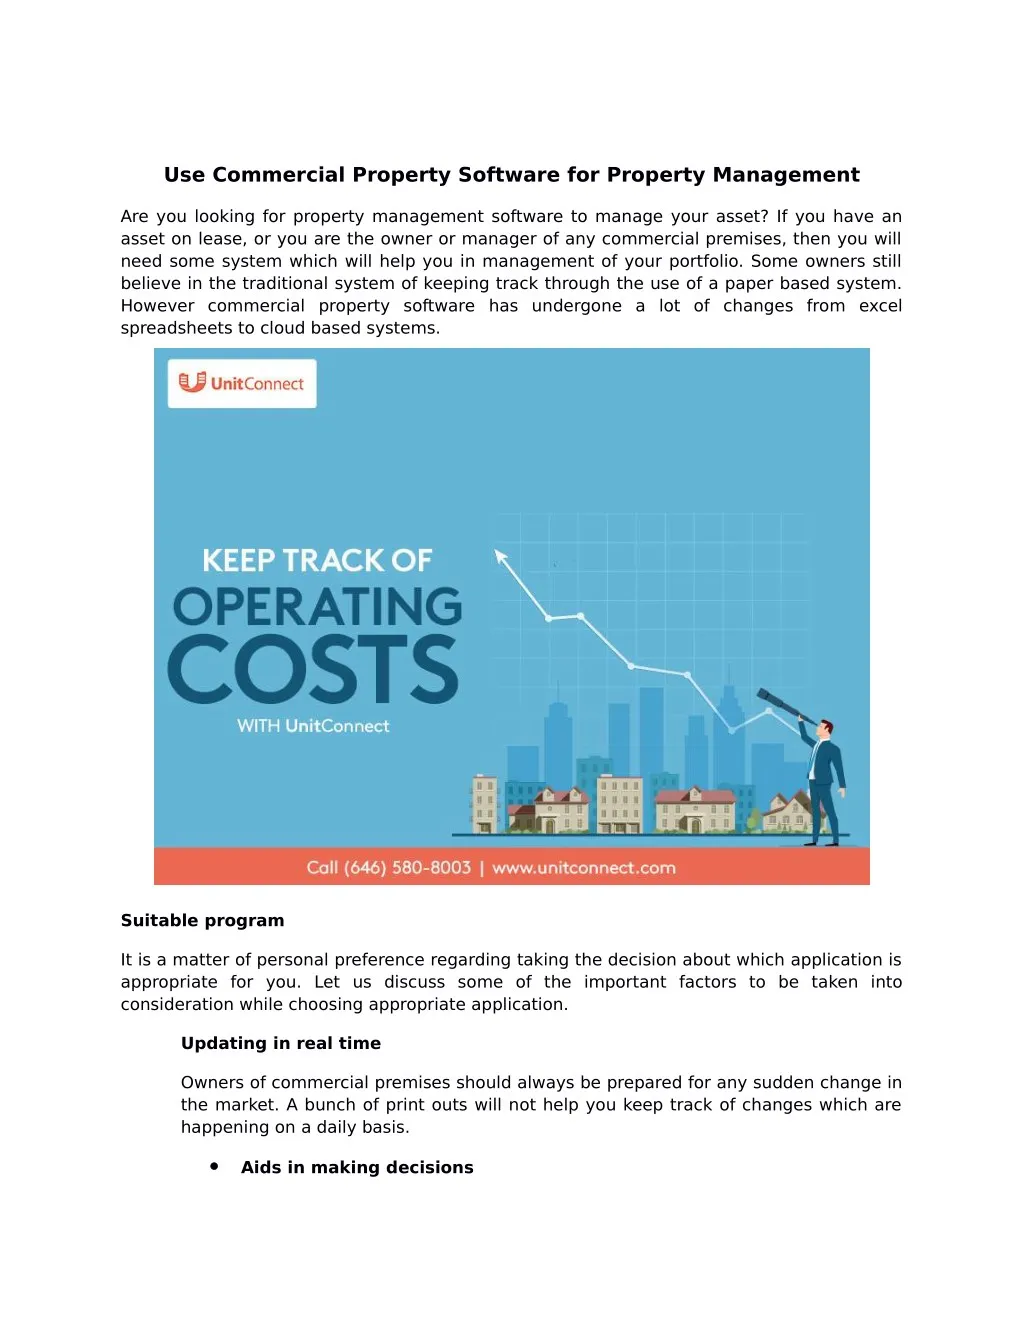 use commercial property software for property